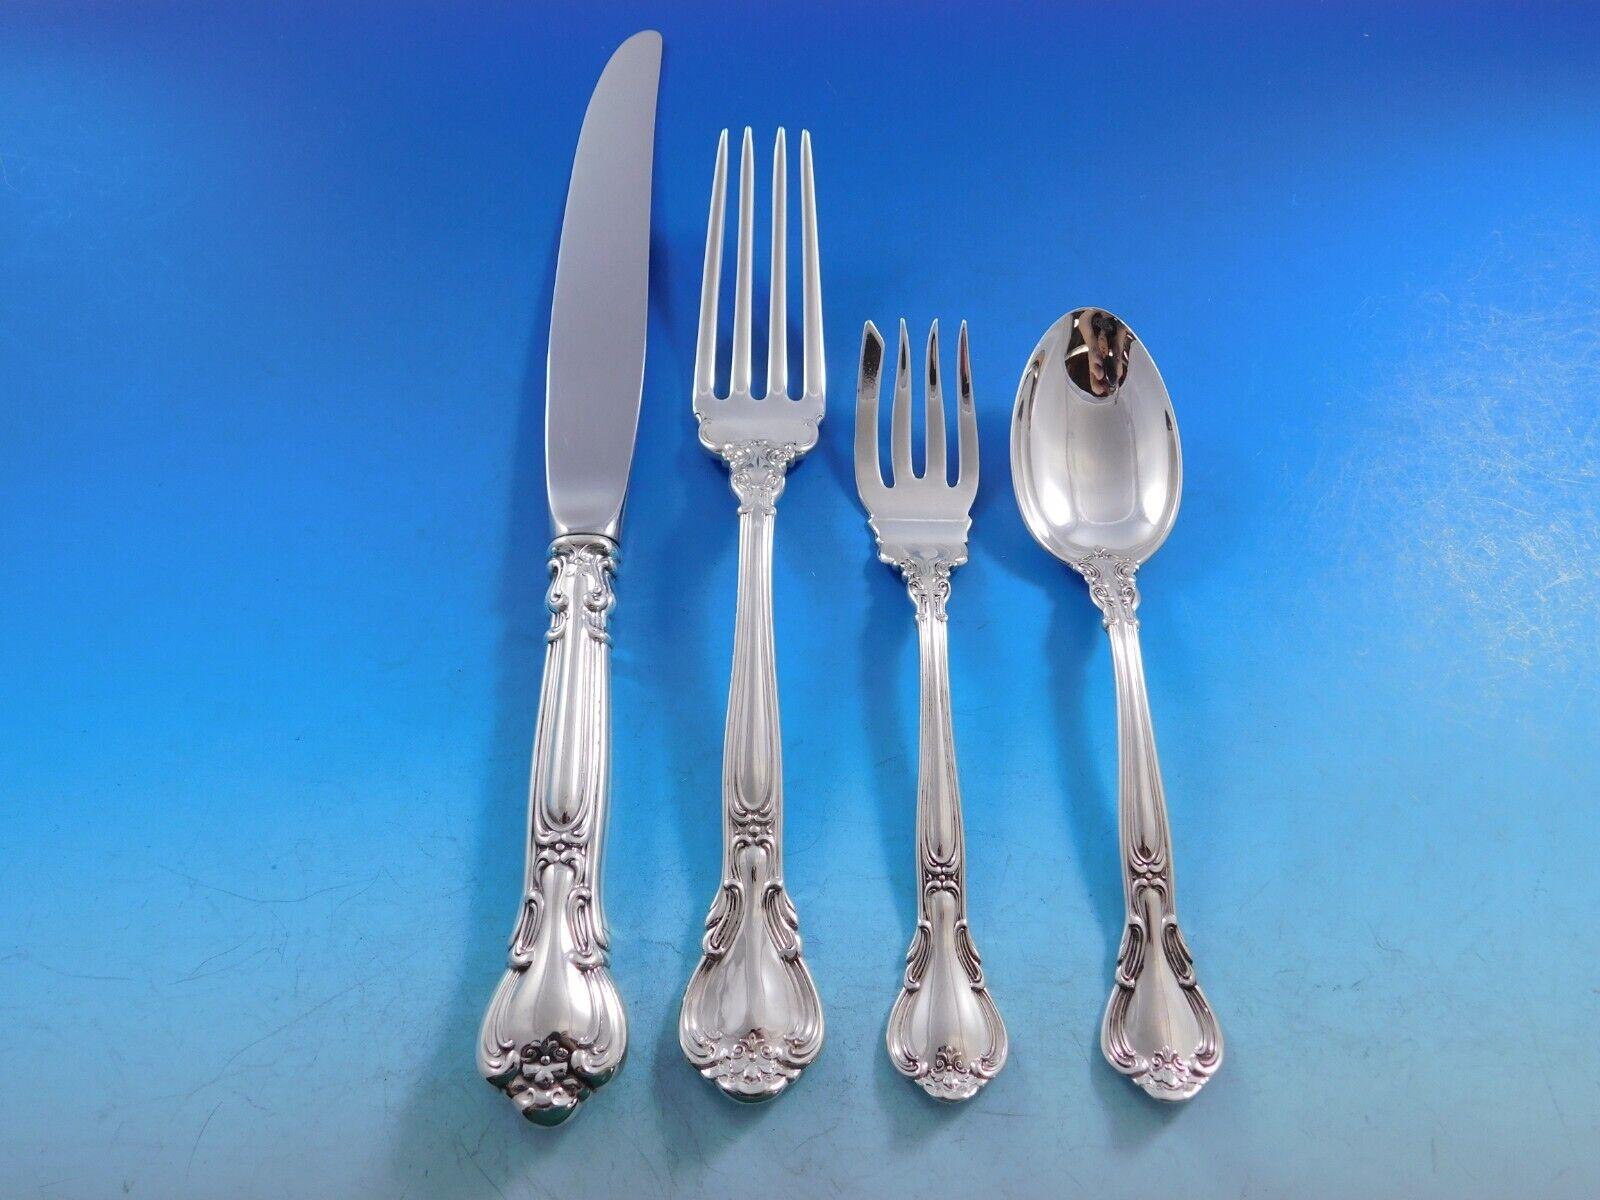 Chantilly by Gorham Sterling Silver Flatware Set for 12 Service 132 Pcs Dinner In Excellent Condition For Sale In Big Bend, WI